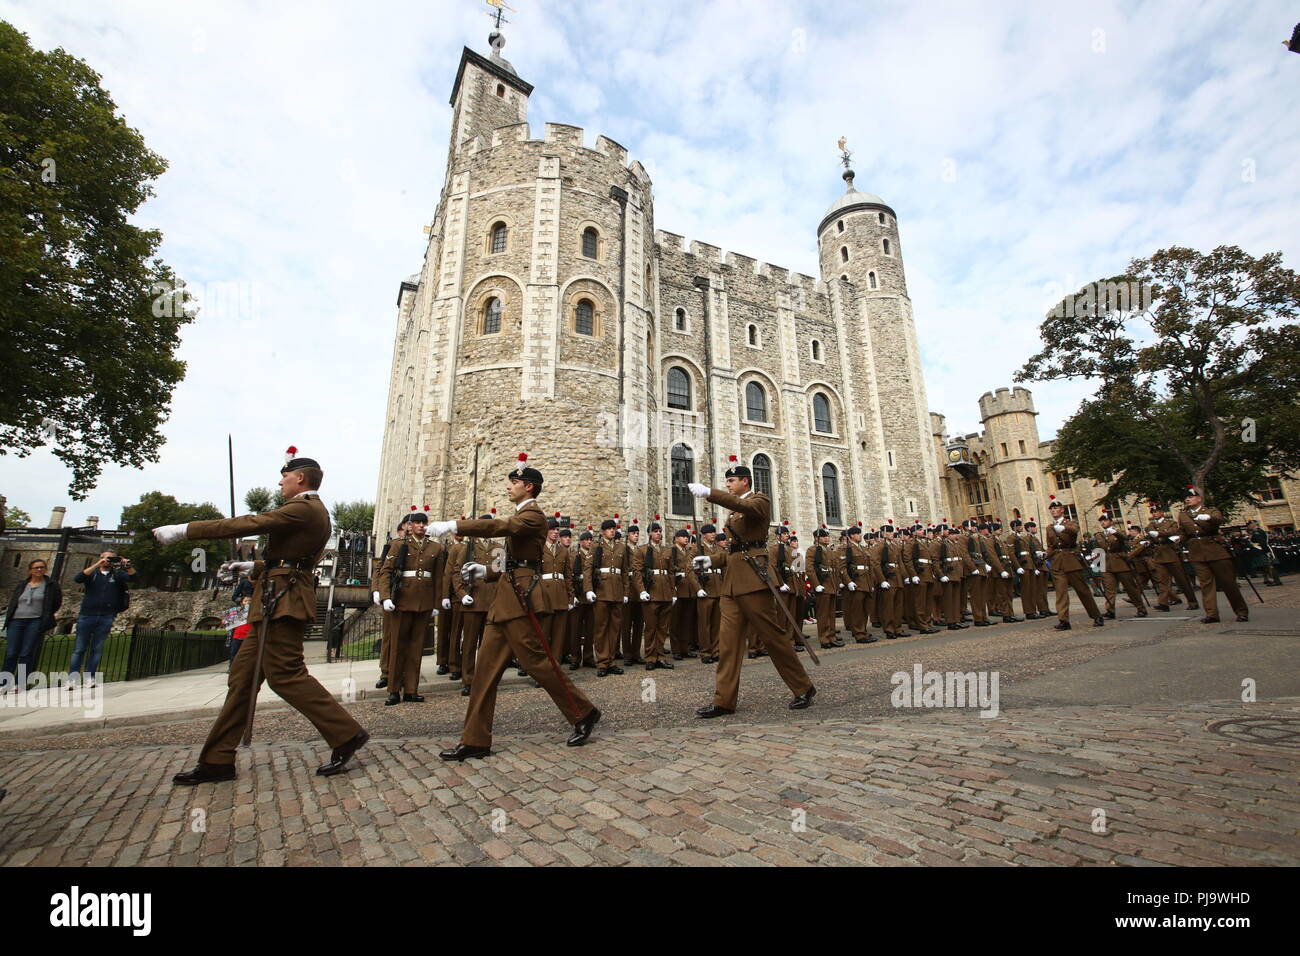 Members of the Royal Regiment of Fusiliers wait to set of from the Tower of London on a parade through the city of London to celebrate 50 years since their regiment was formed. Stock Photo